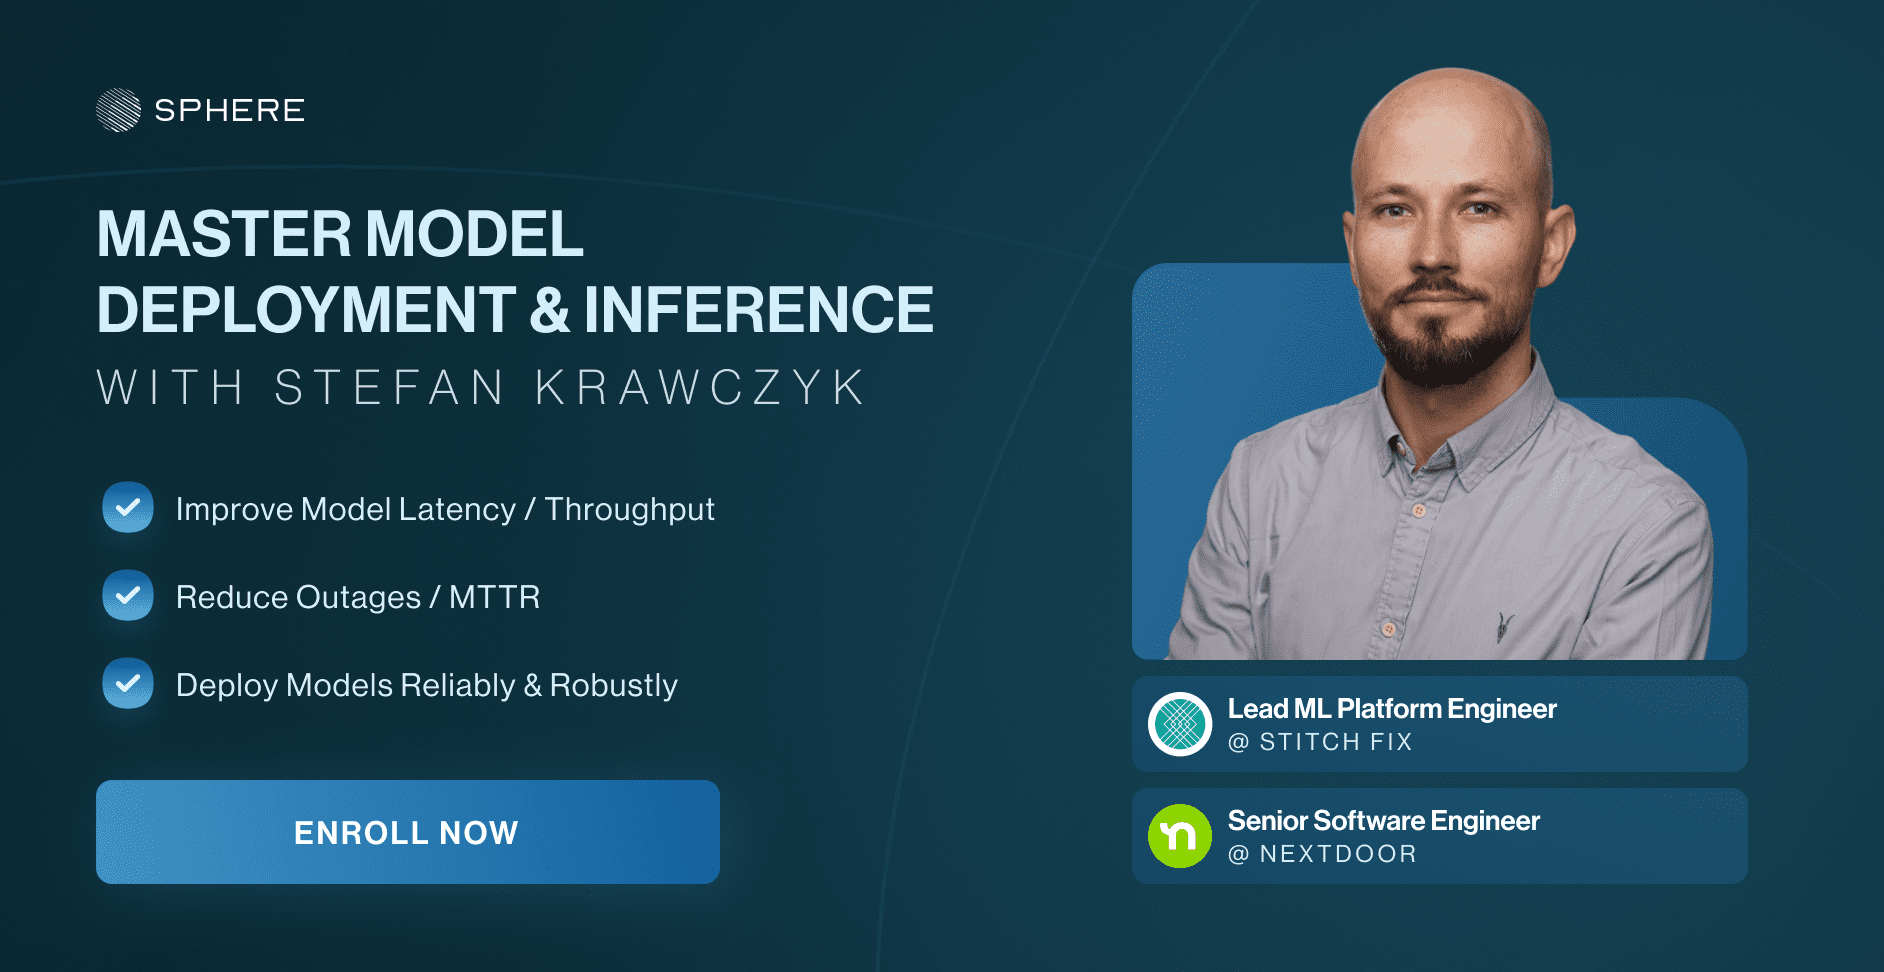 Mastering MLOps: Live Model Deployment & Inference Course with Stefan Krawczyk